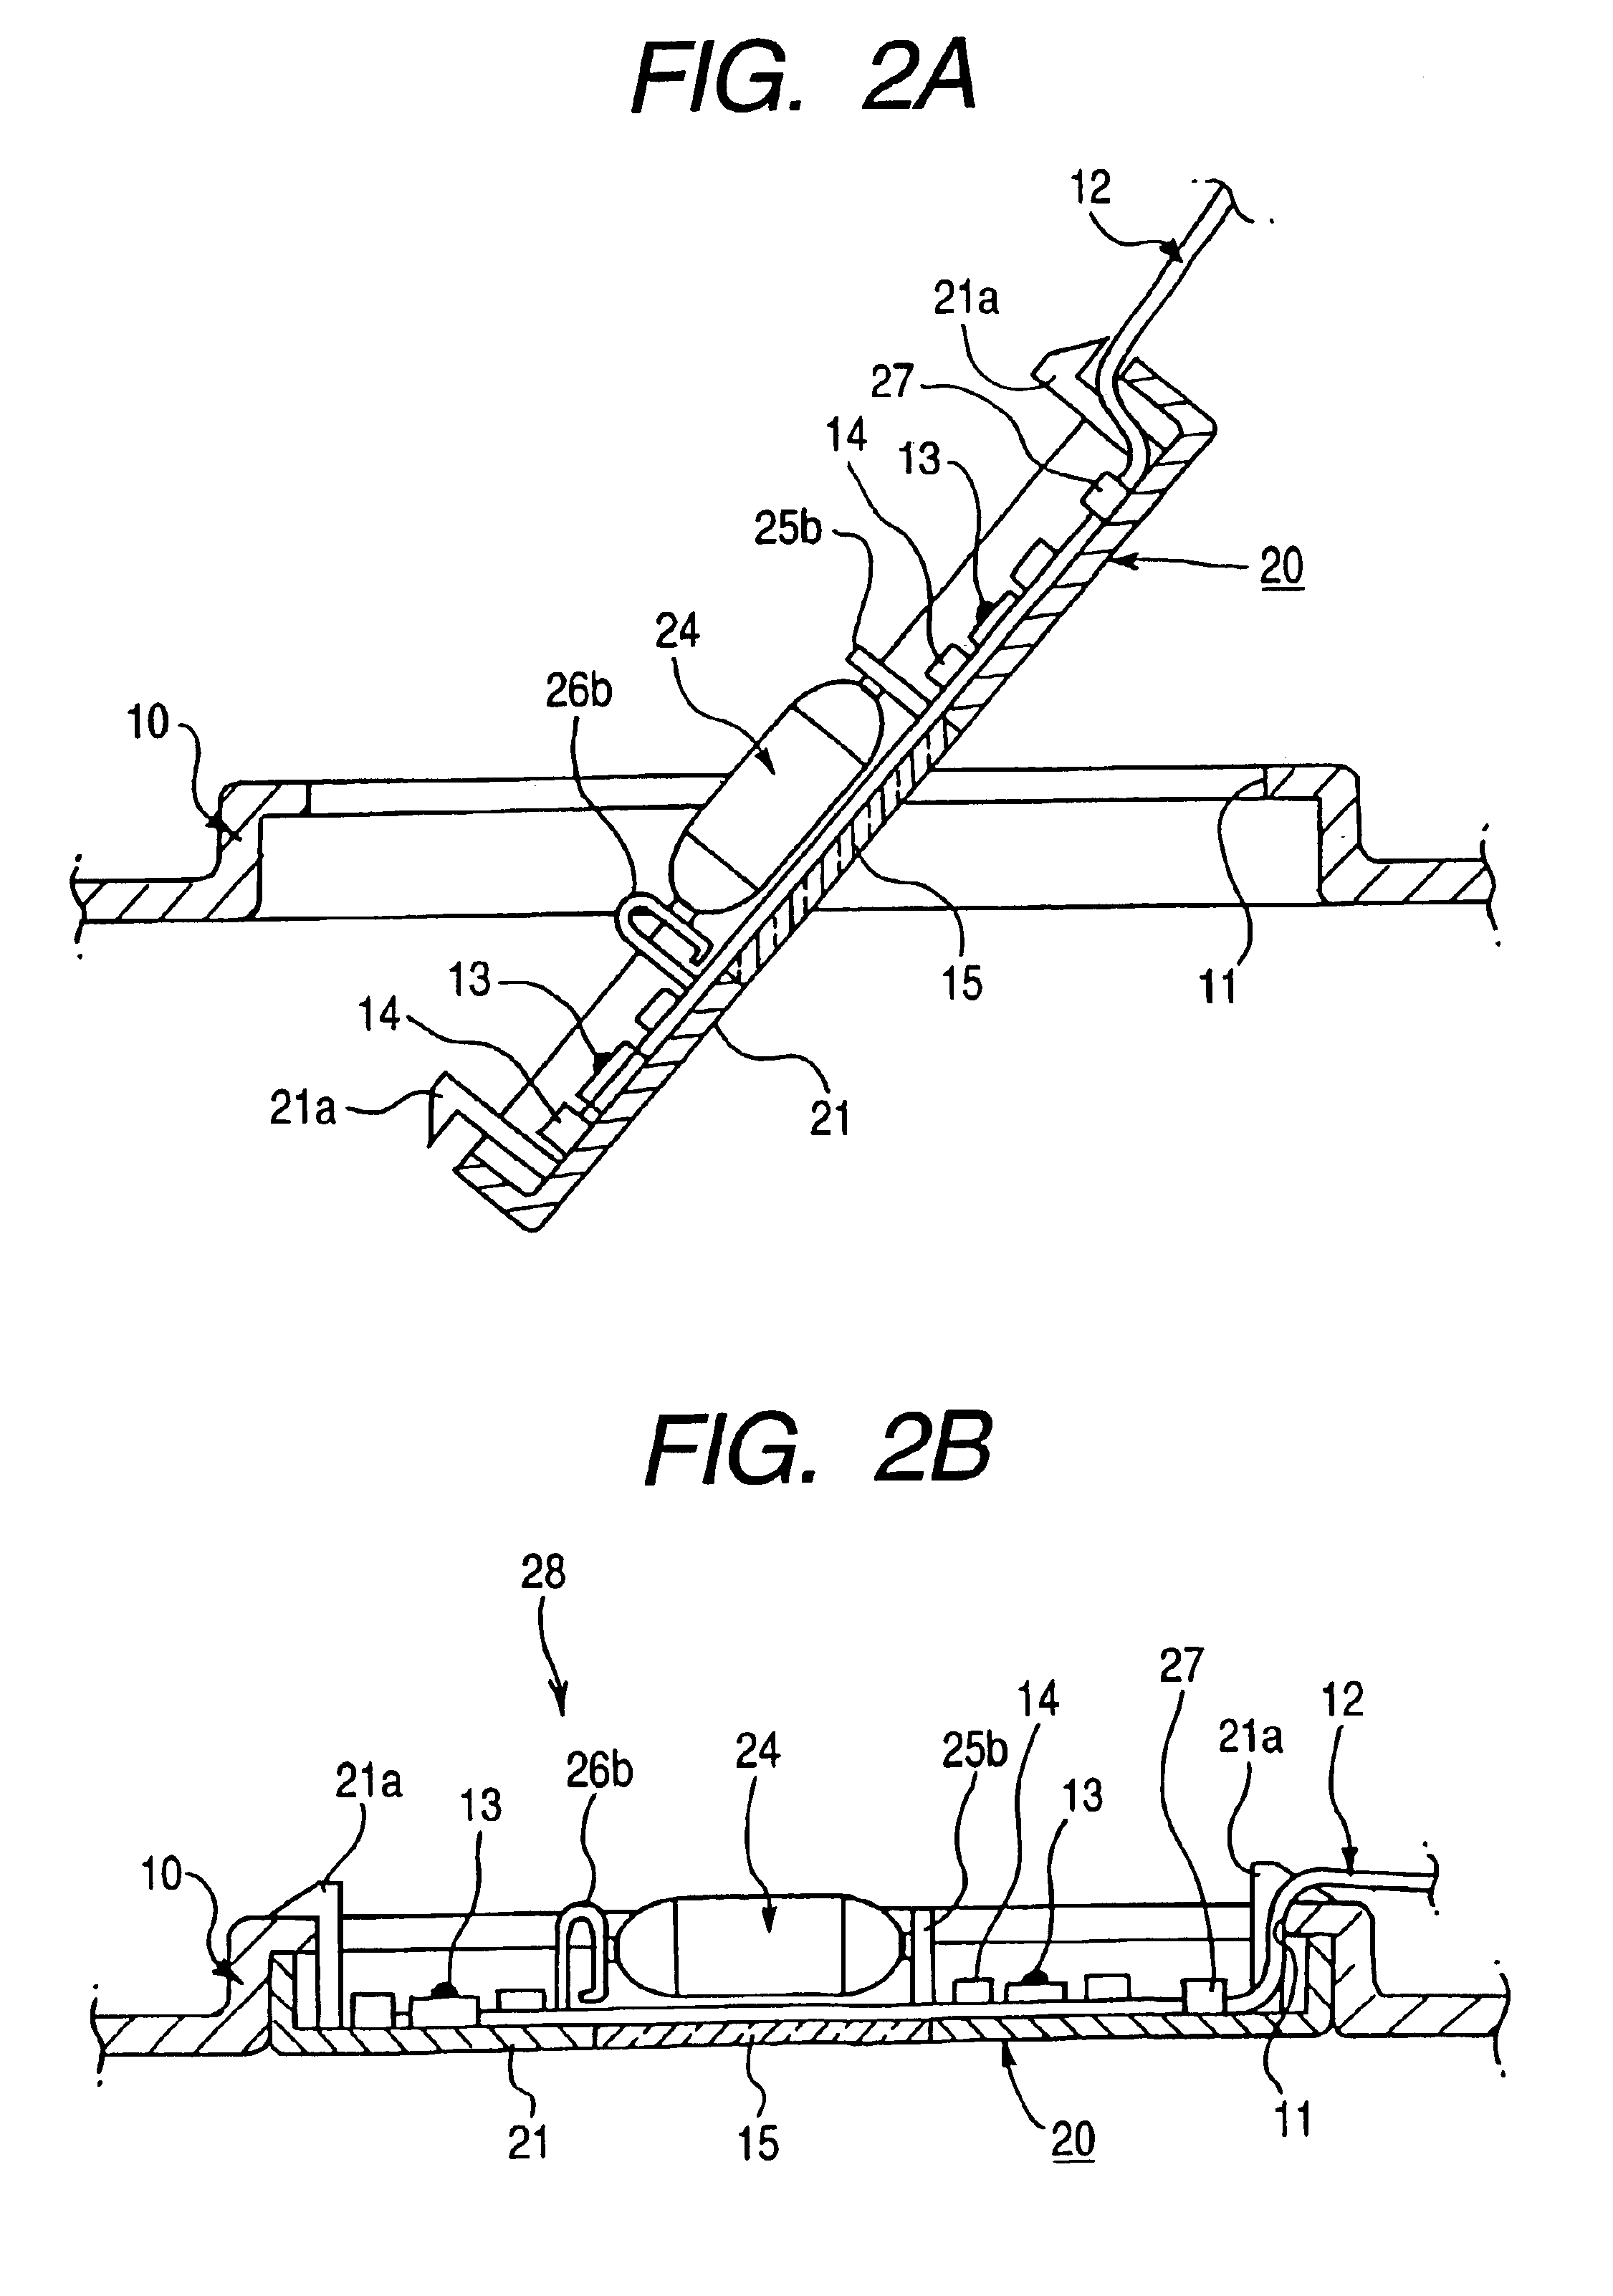 Lamp unit assembling method and lamp unit mounting structure